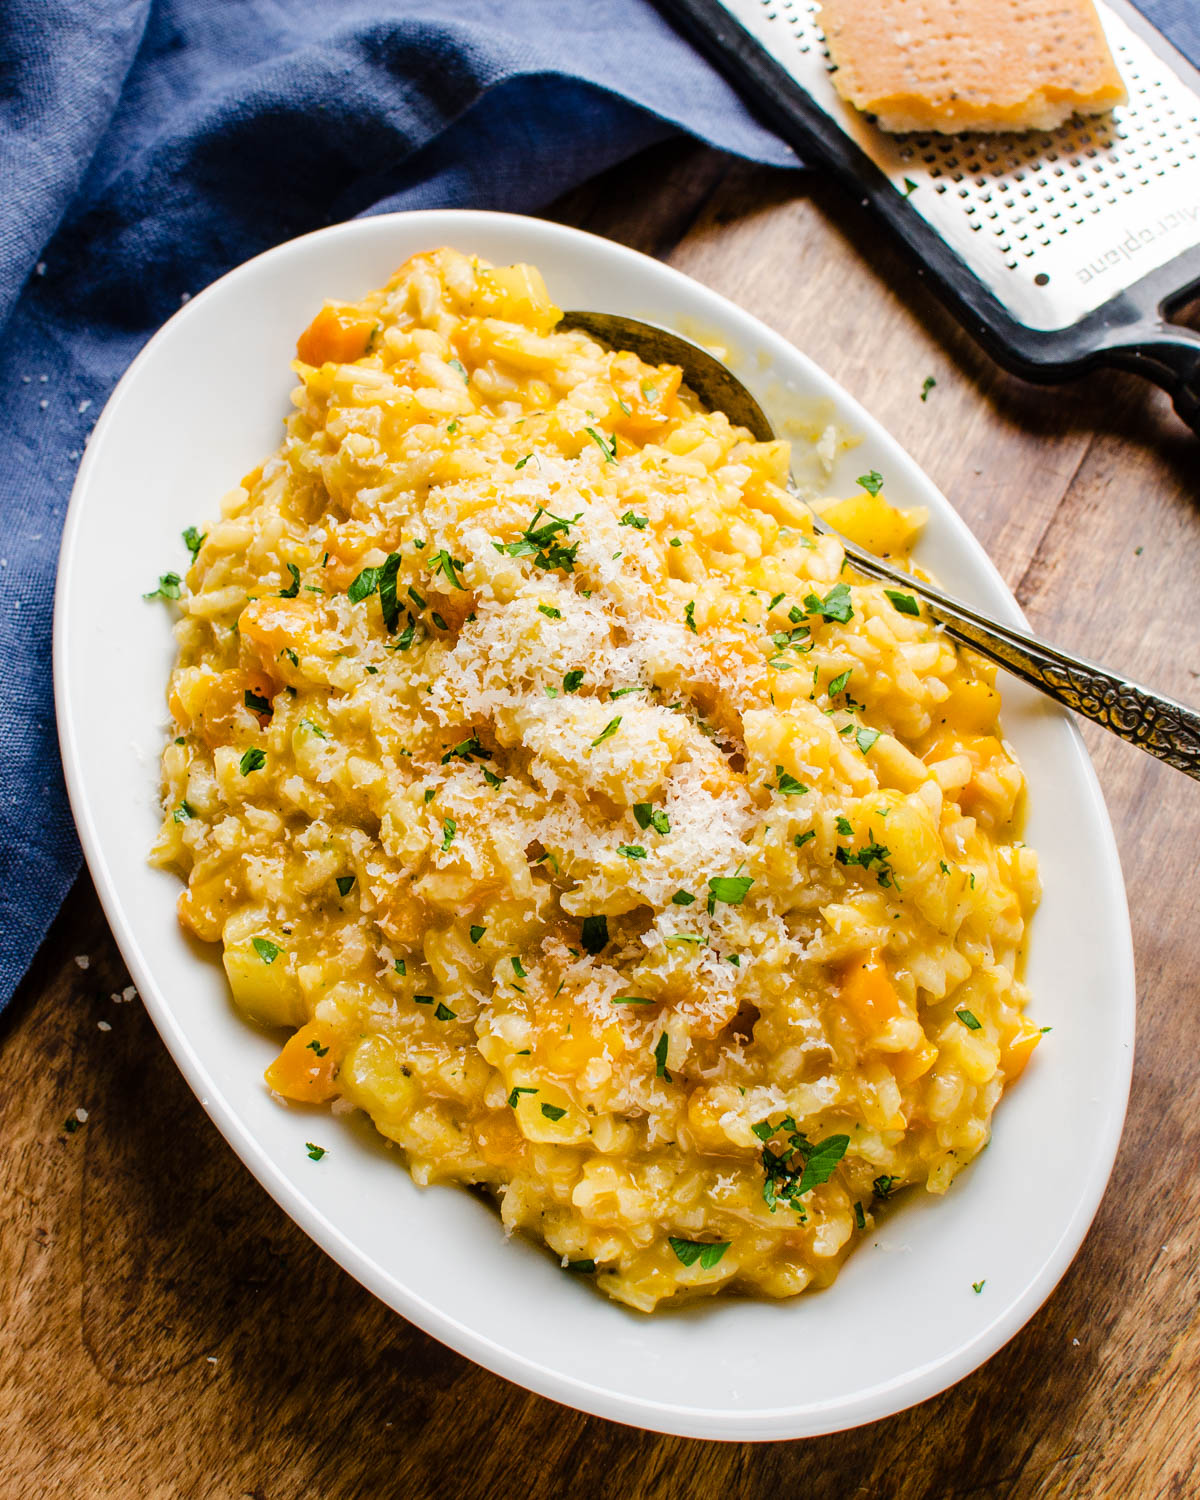 A platter of squash risotto.